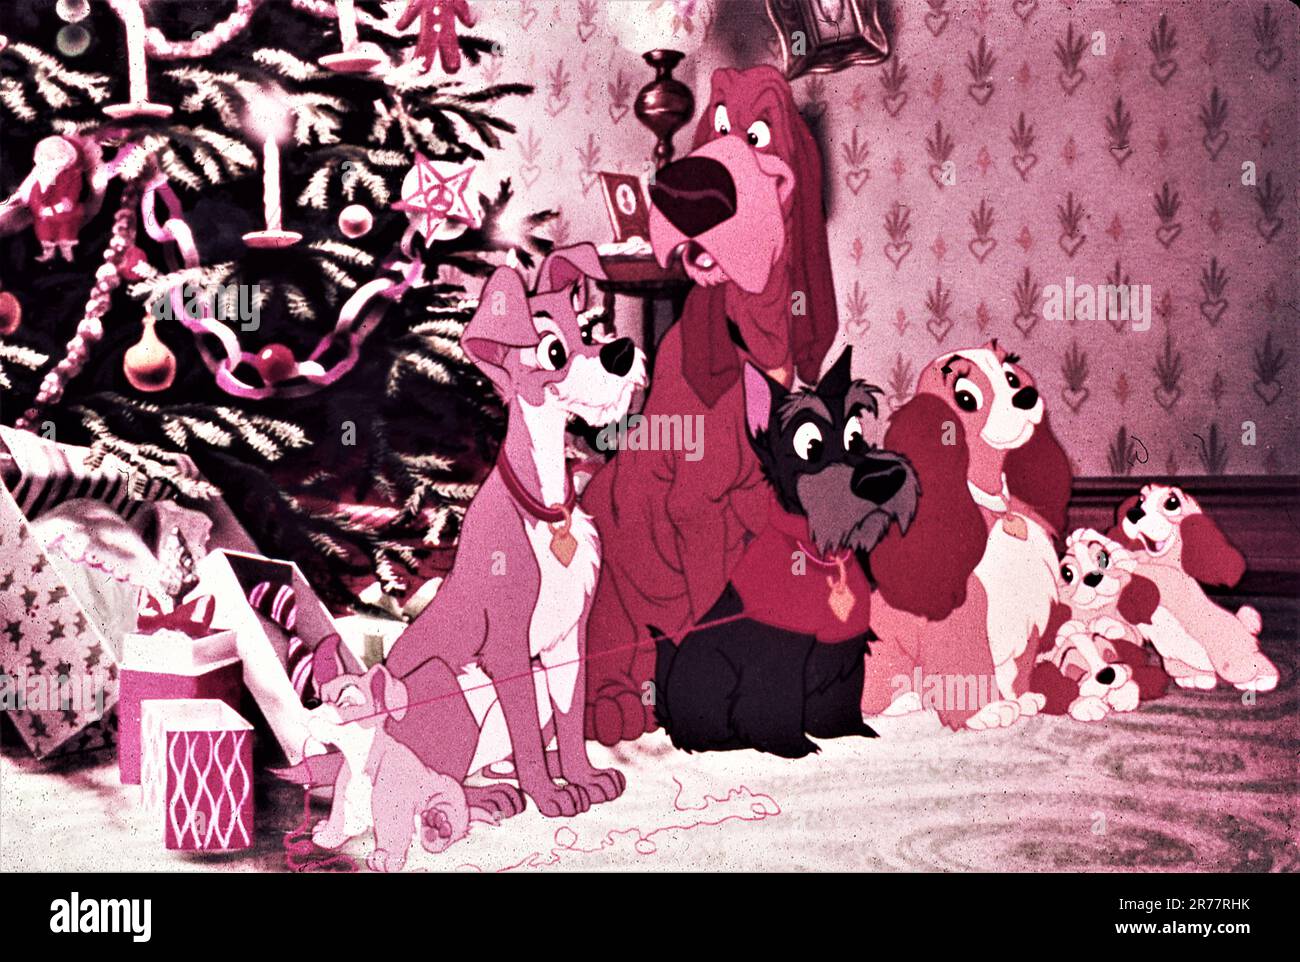 Christmas Group of Dogs in WALT DISNEY'S LADY AND THE TRAMP 1955 directors CLYDE GERONIMI WILFRED JACKSON and HAMILTON LUSKE from the story by Ward Greene Walt Disney productions / Buena Vista Film Distribution Company Stock Photo